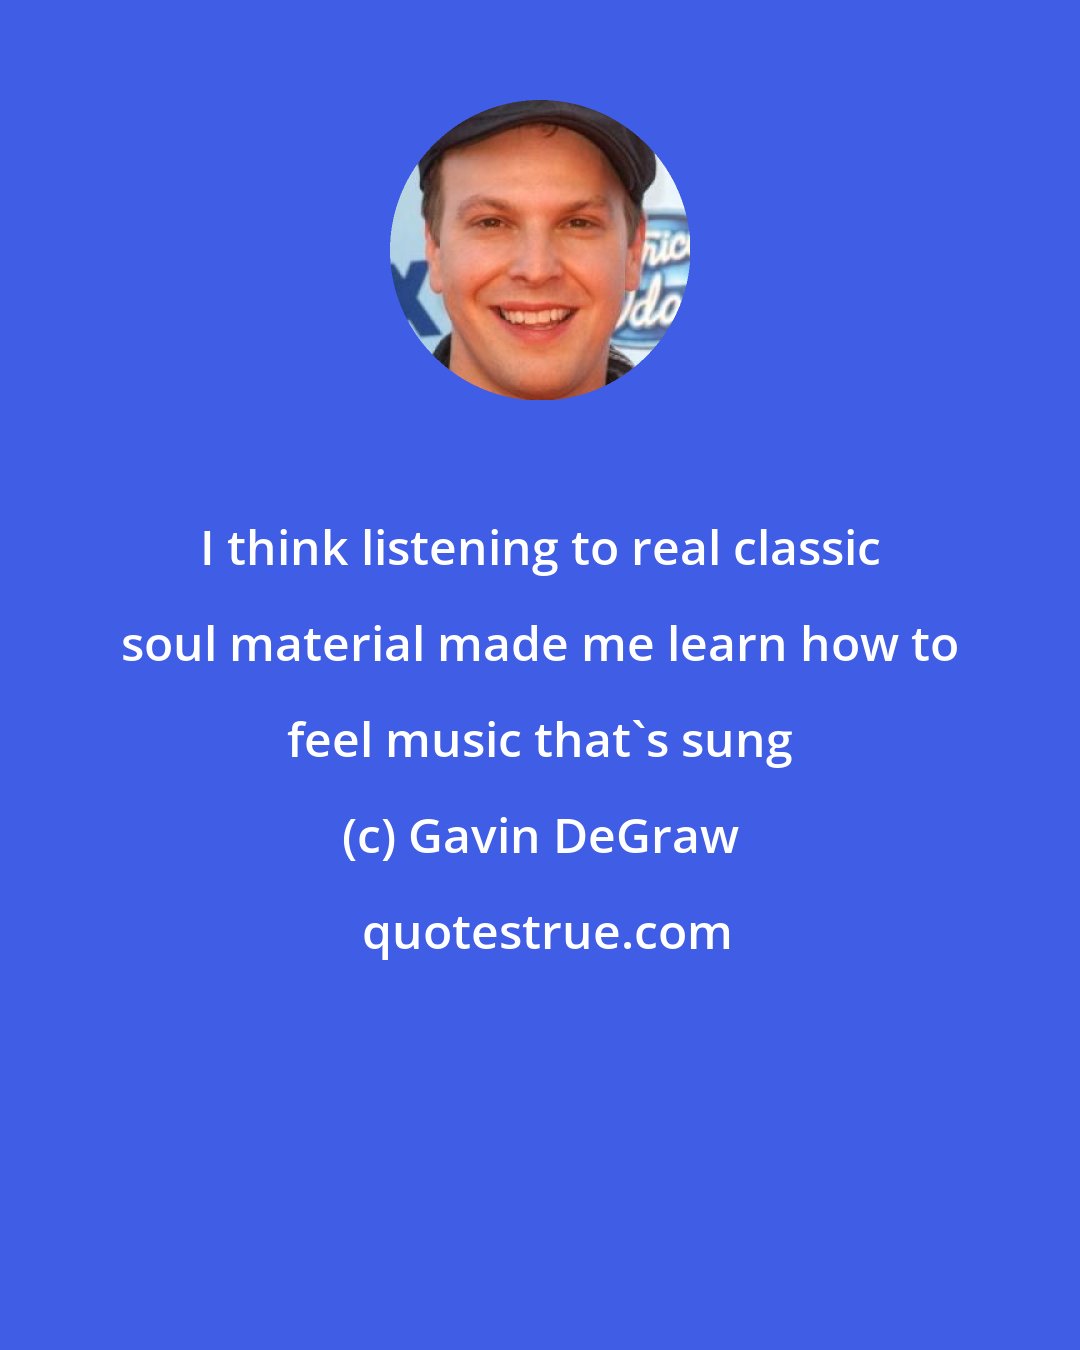 Gavin DeGraw: I think listening to real classic soul material made me learn how to feel music that's sung